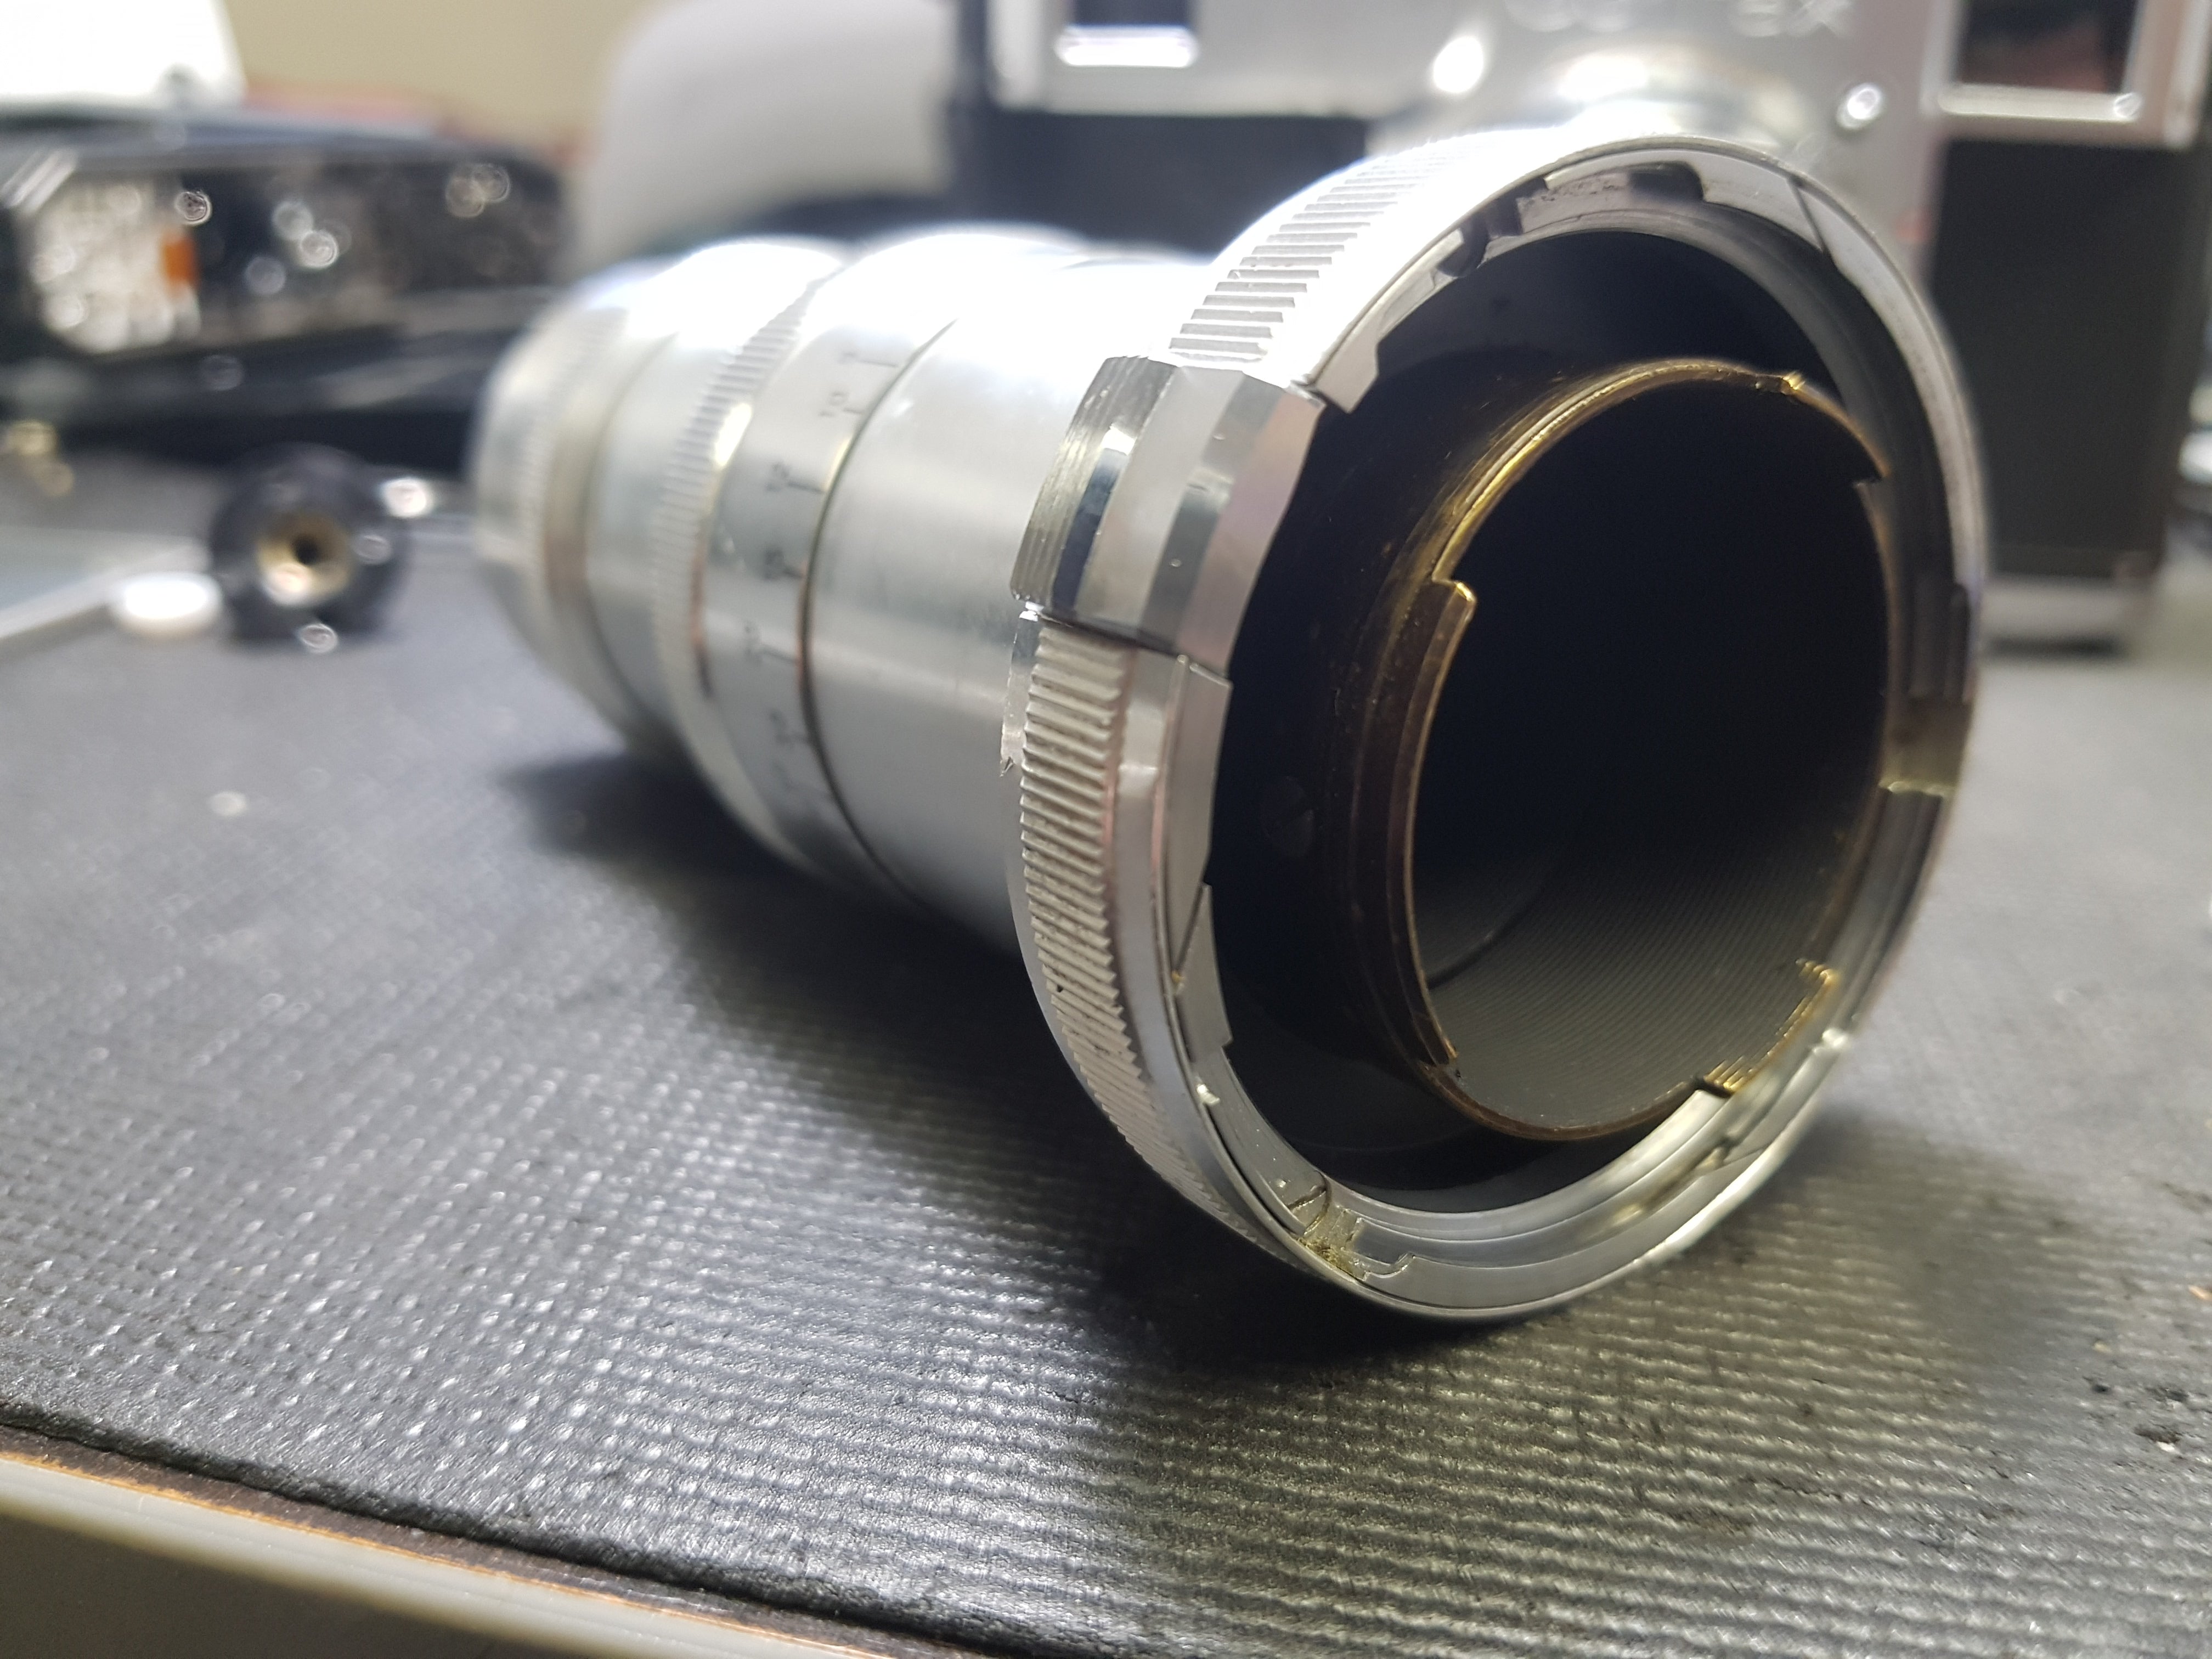 Canada's #1 source for quality repairs, CLAs, cleaning, rebuilds and calibrations on film gear! Warrantied work * Quality Repairs * Fast Turnaround Time * Competitive Prices